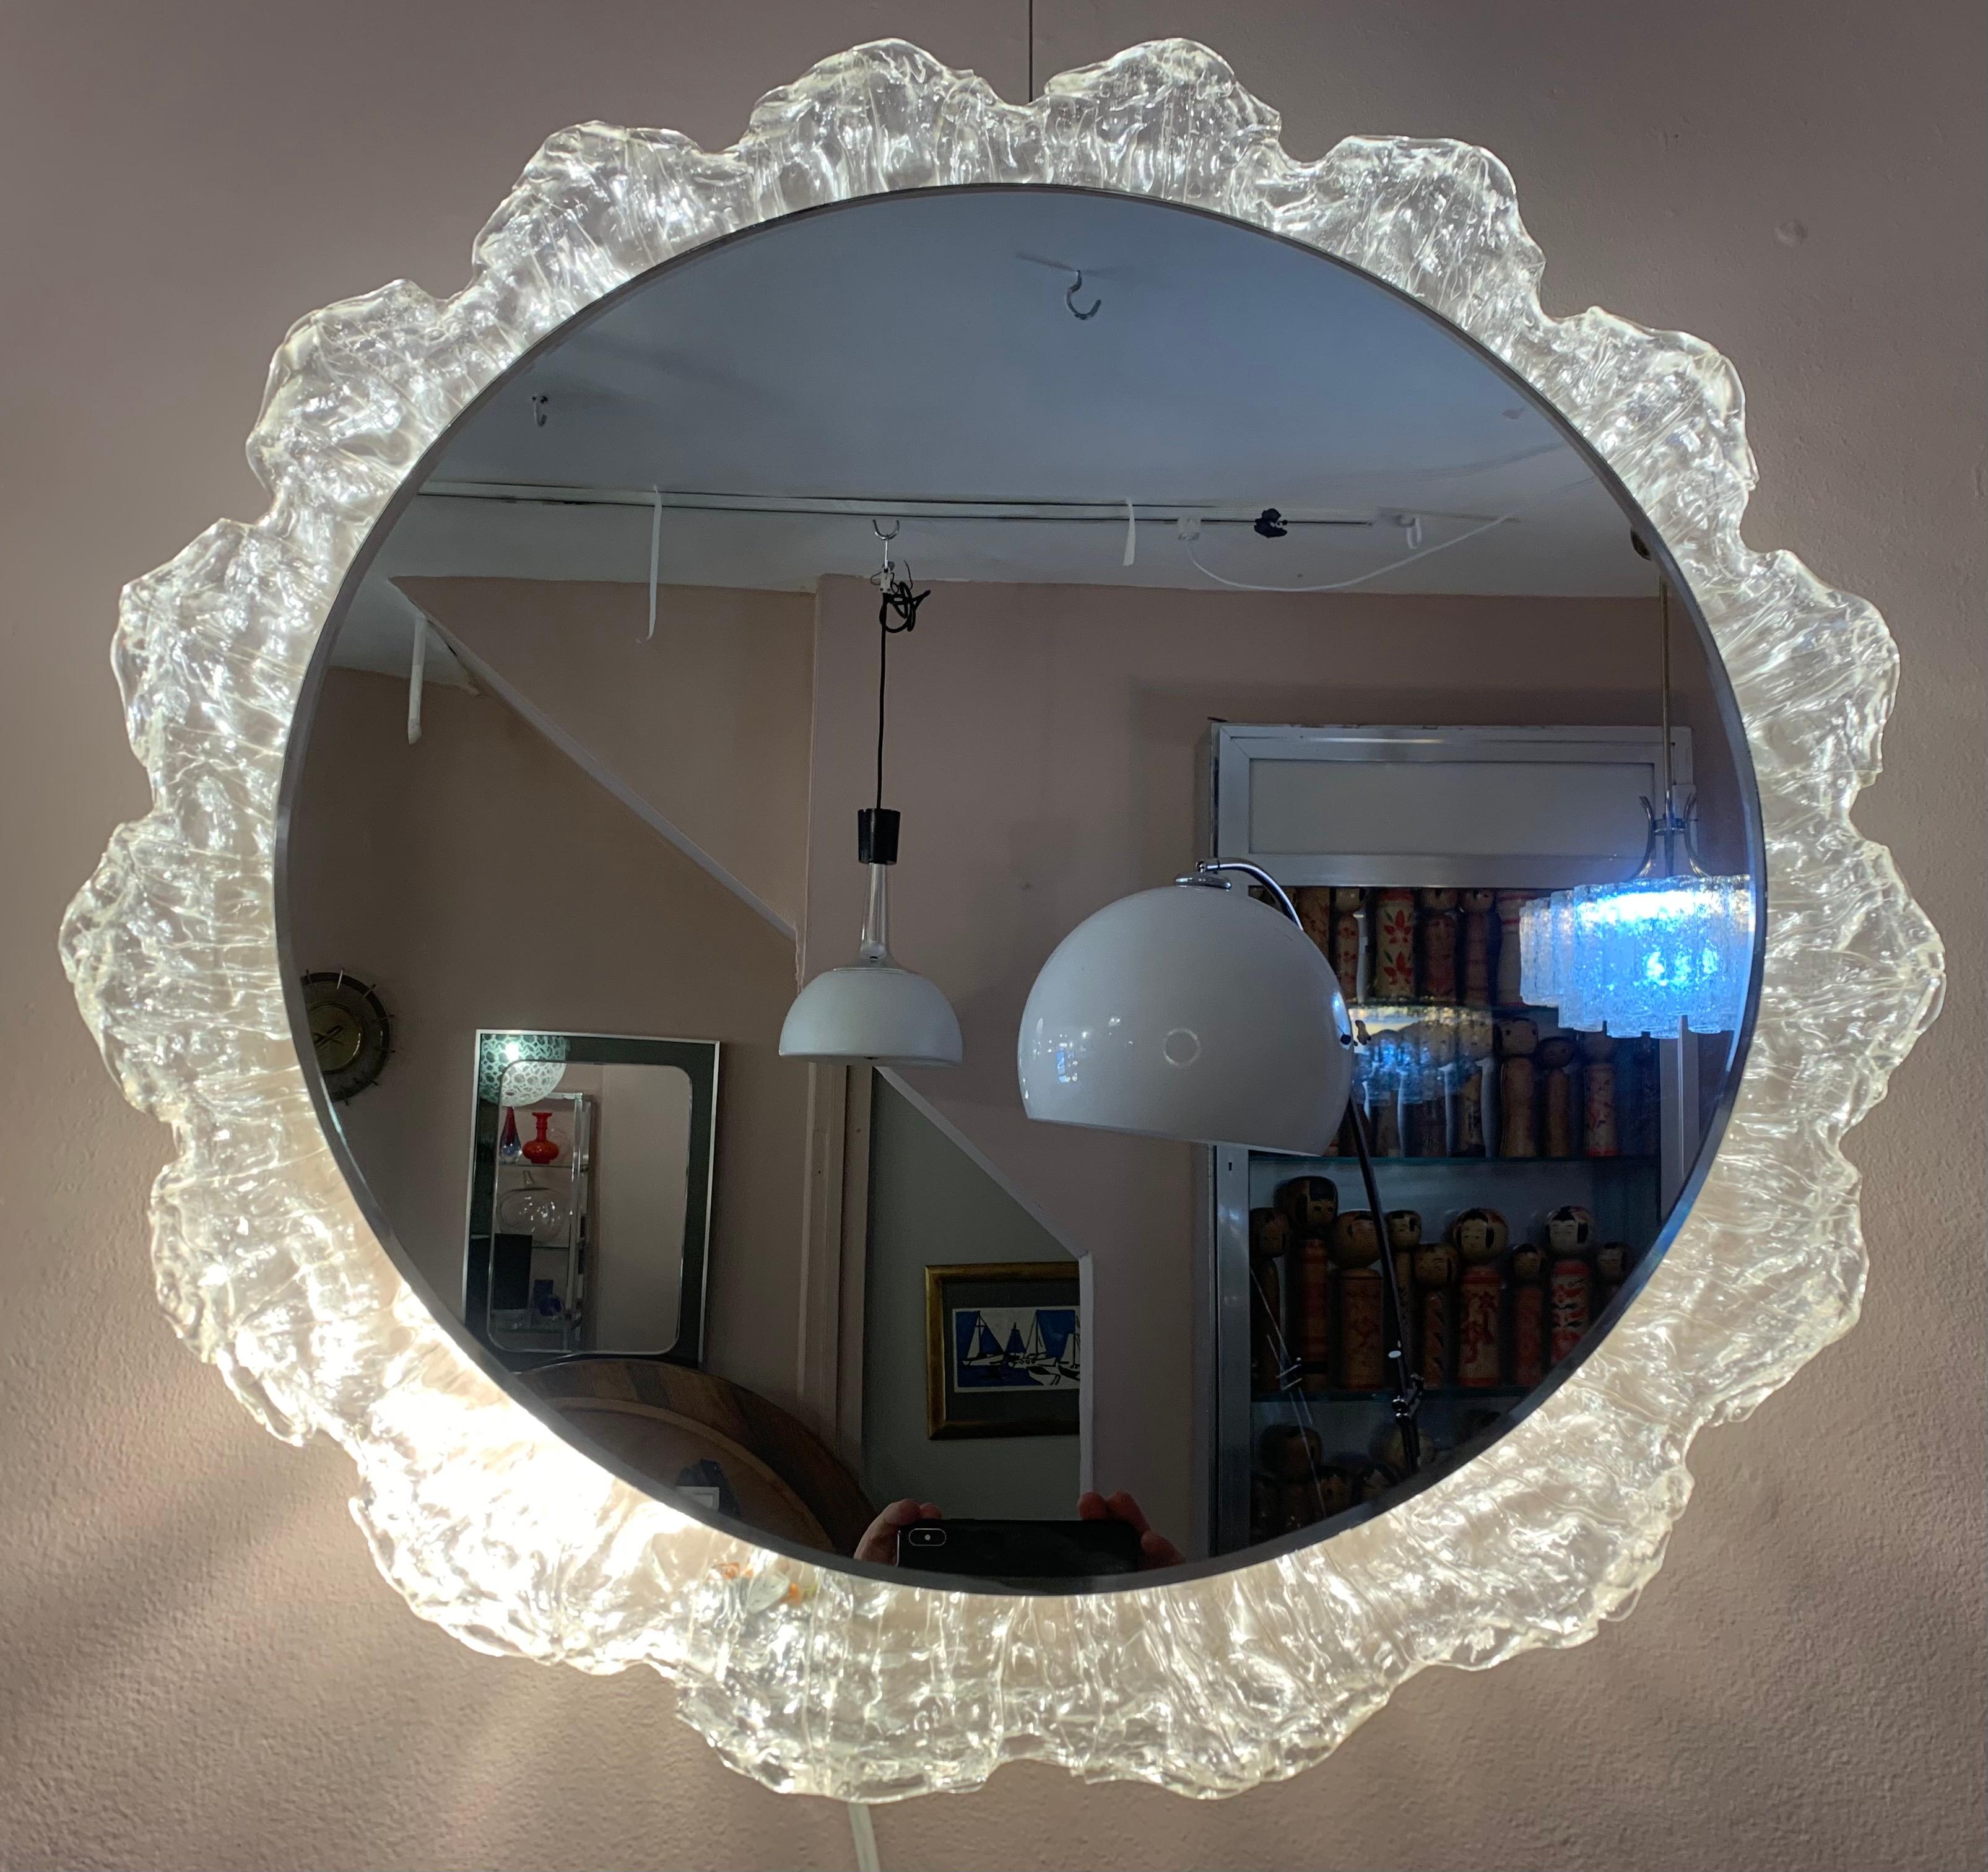 1970s German illuminated wall mirror with a large sunflower design made from mottled lucite/acrylic which the mirror sits within. The mirror hooks onto the frame which the four bulbs sit behind. The frame is easily screwed onto the wall. To change